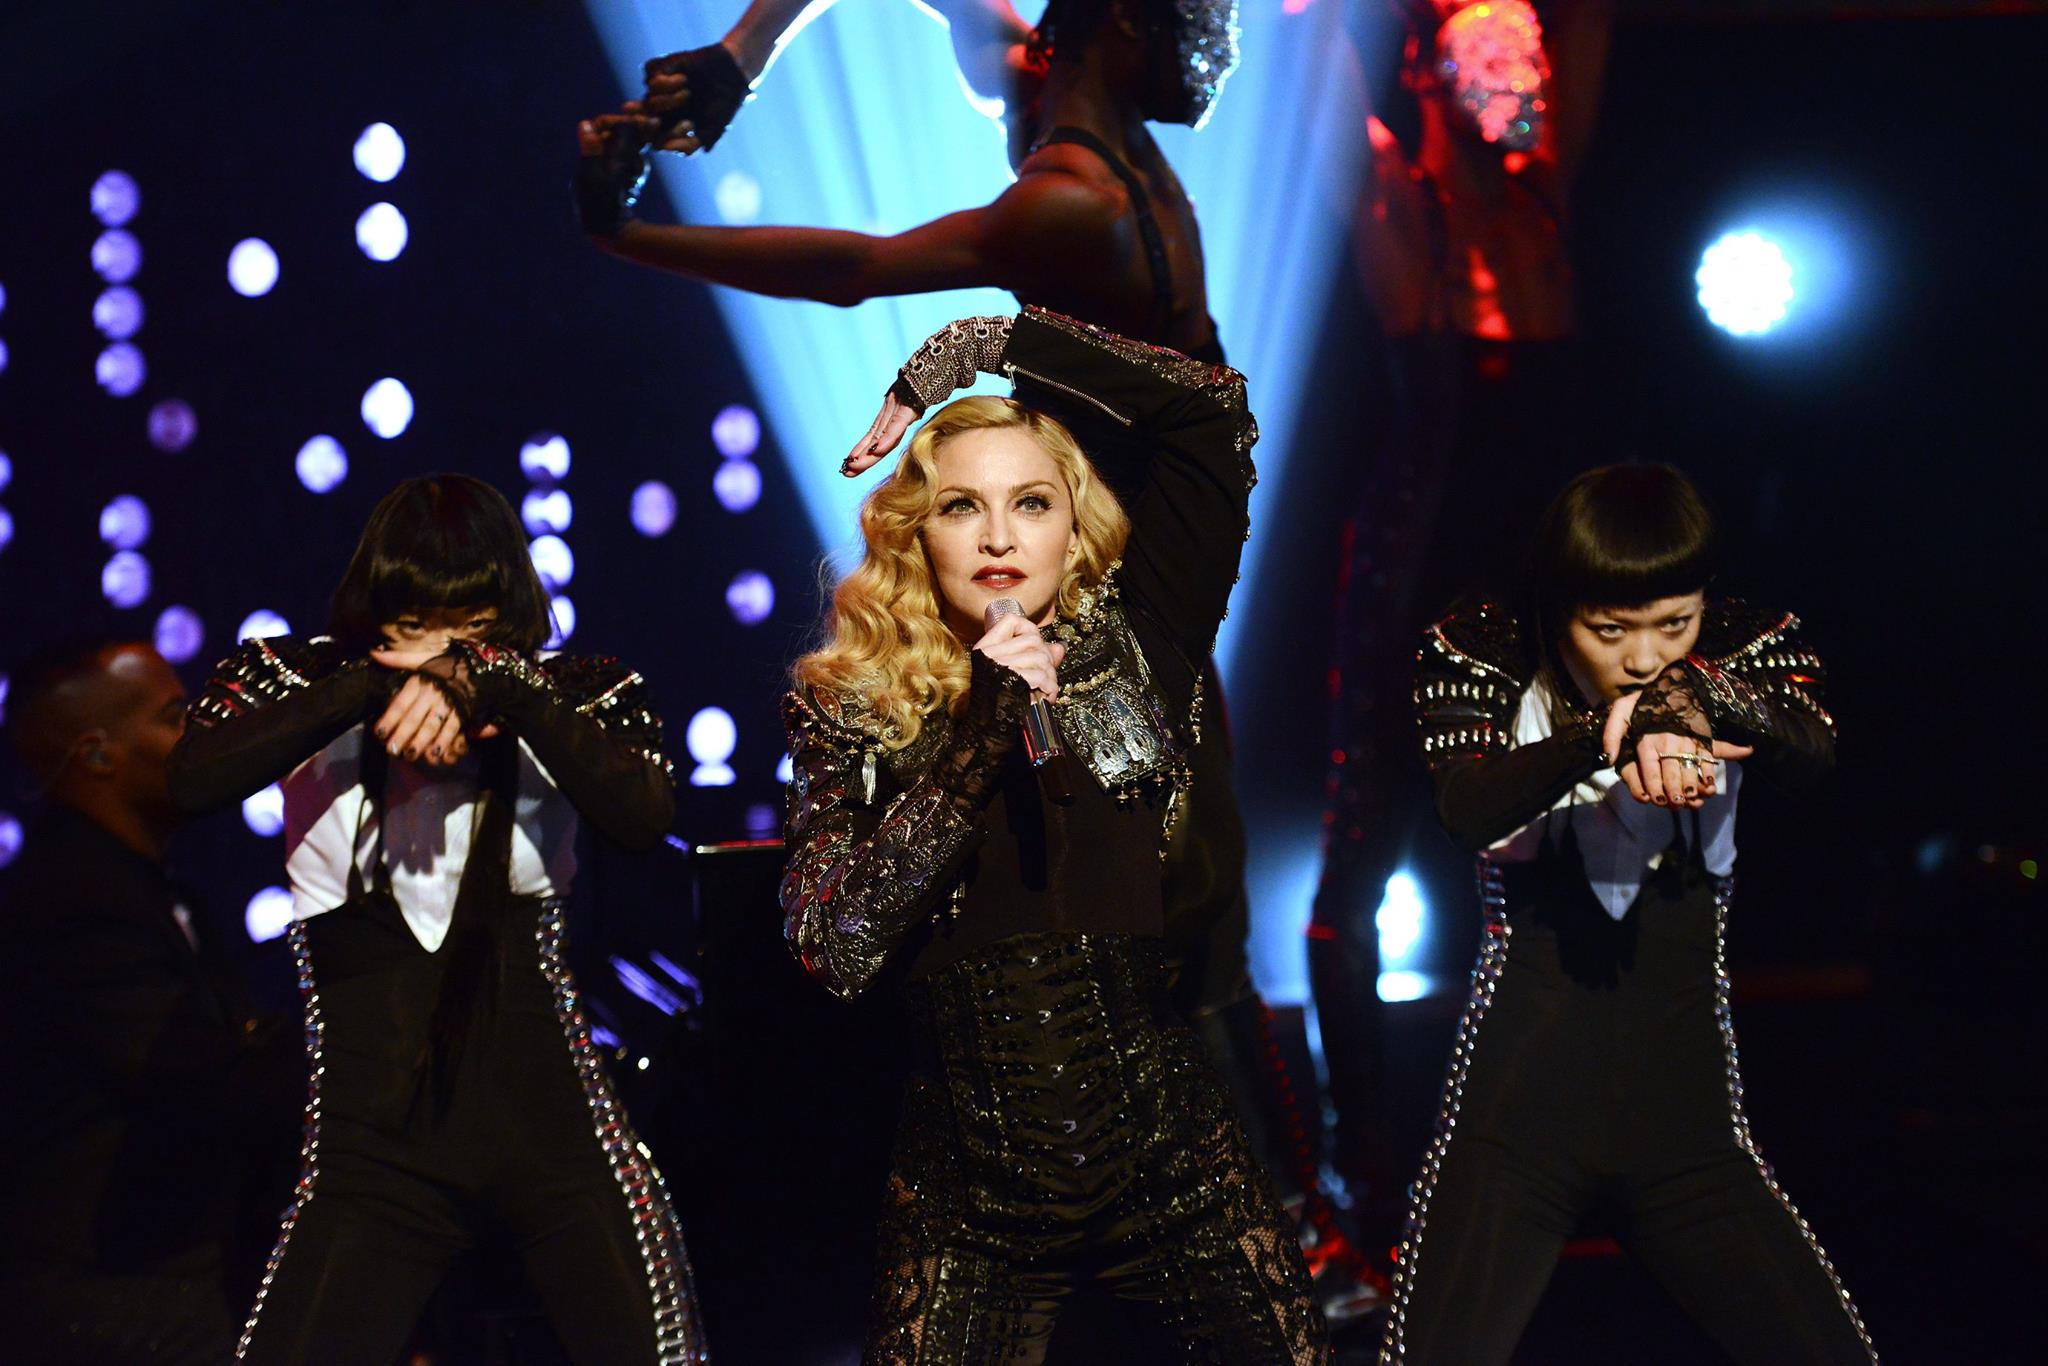 Madonna's live performance at Jonathan Ross Show